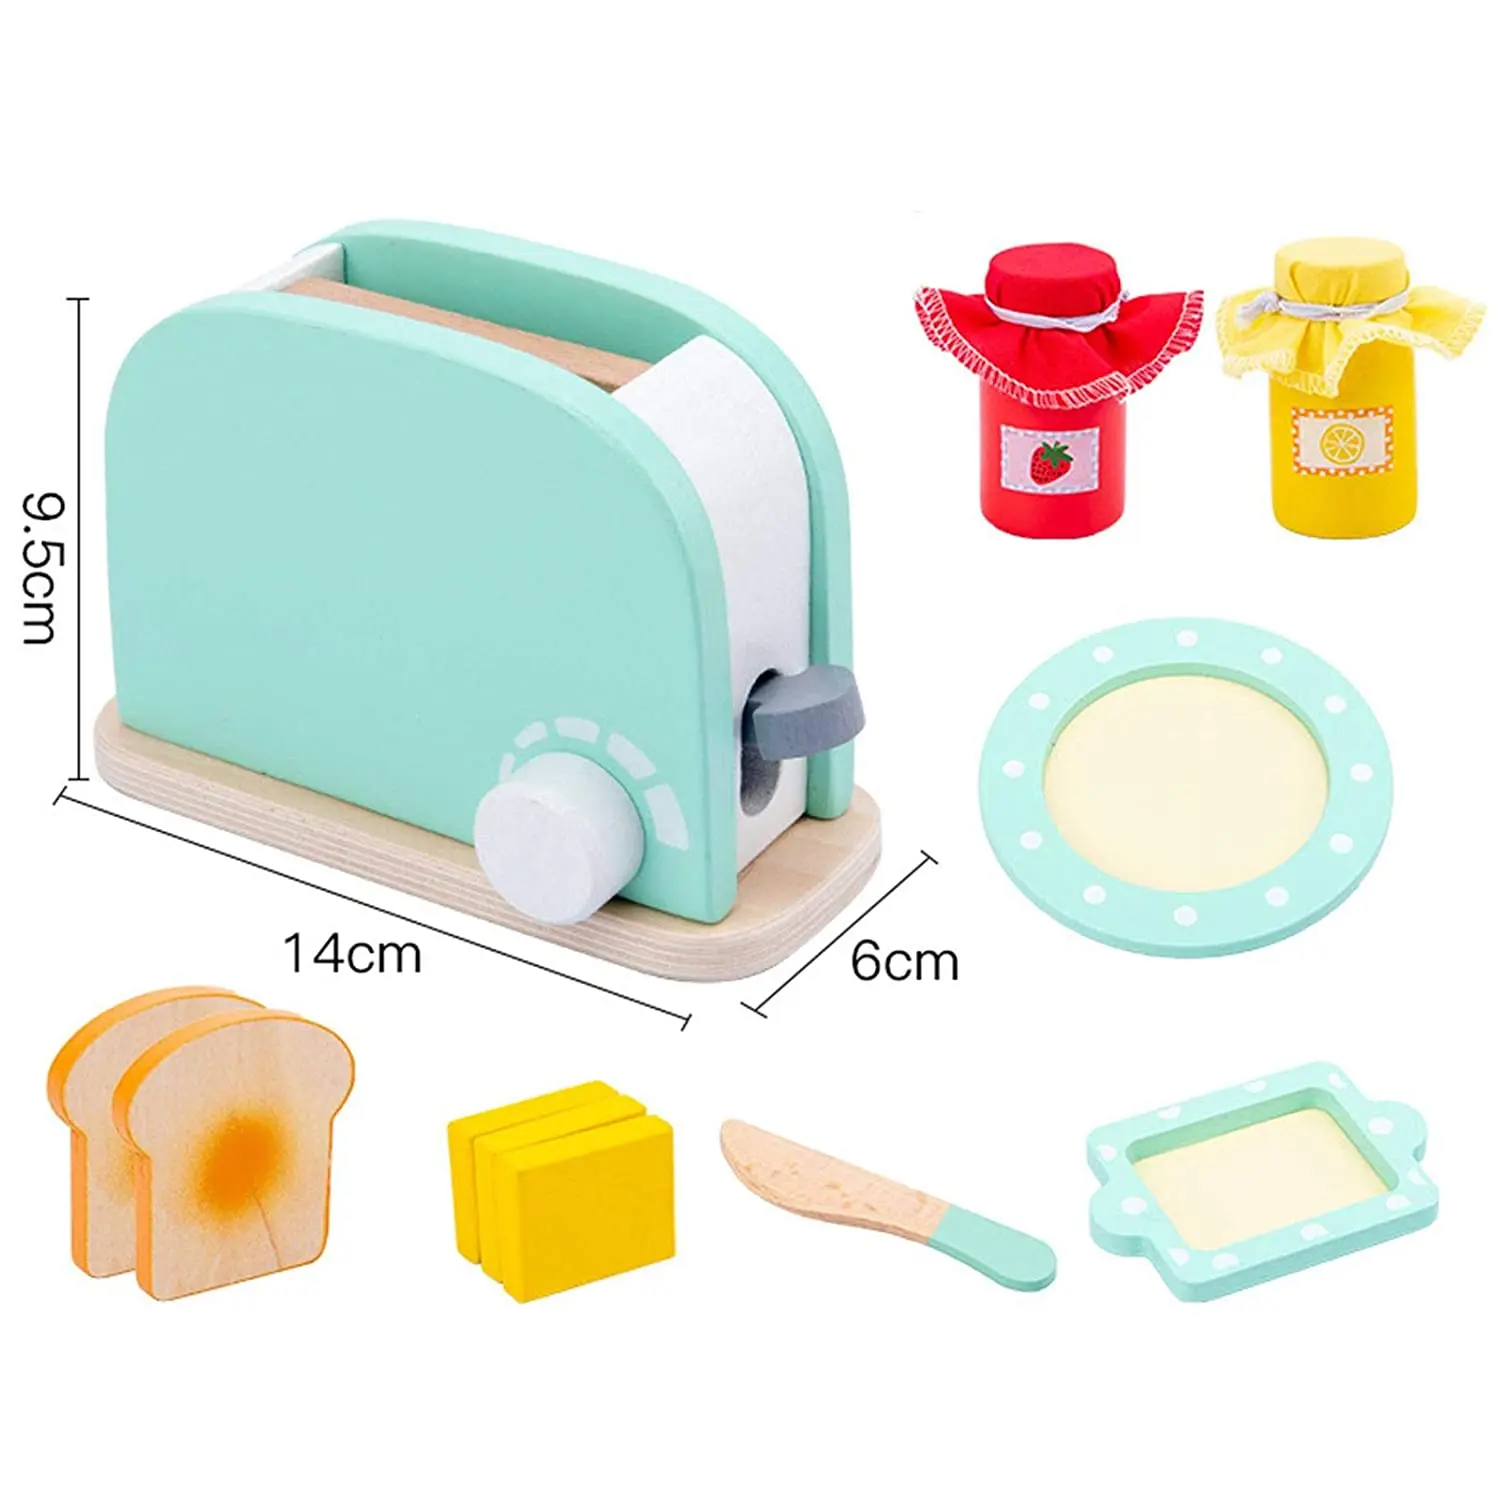 Kids Wooden Pretend Play Sets Simulation Toasters Machine Toy Game Kitchen Z1T3 